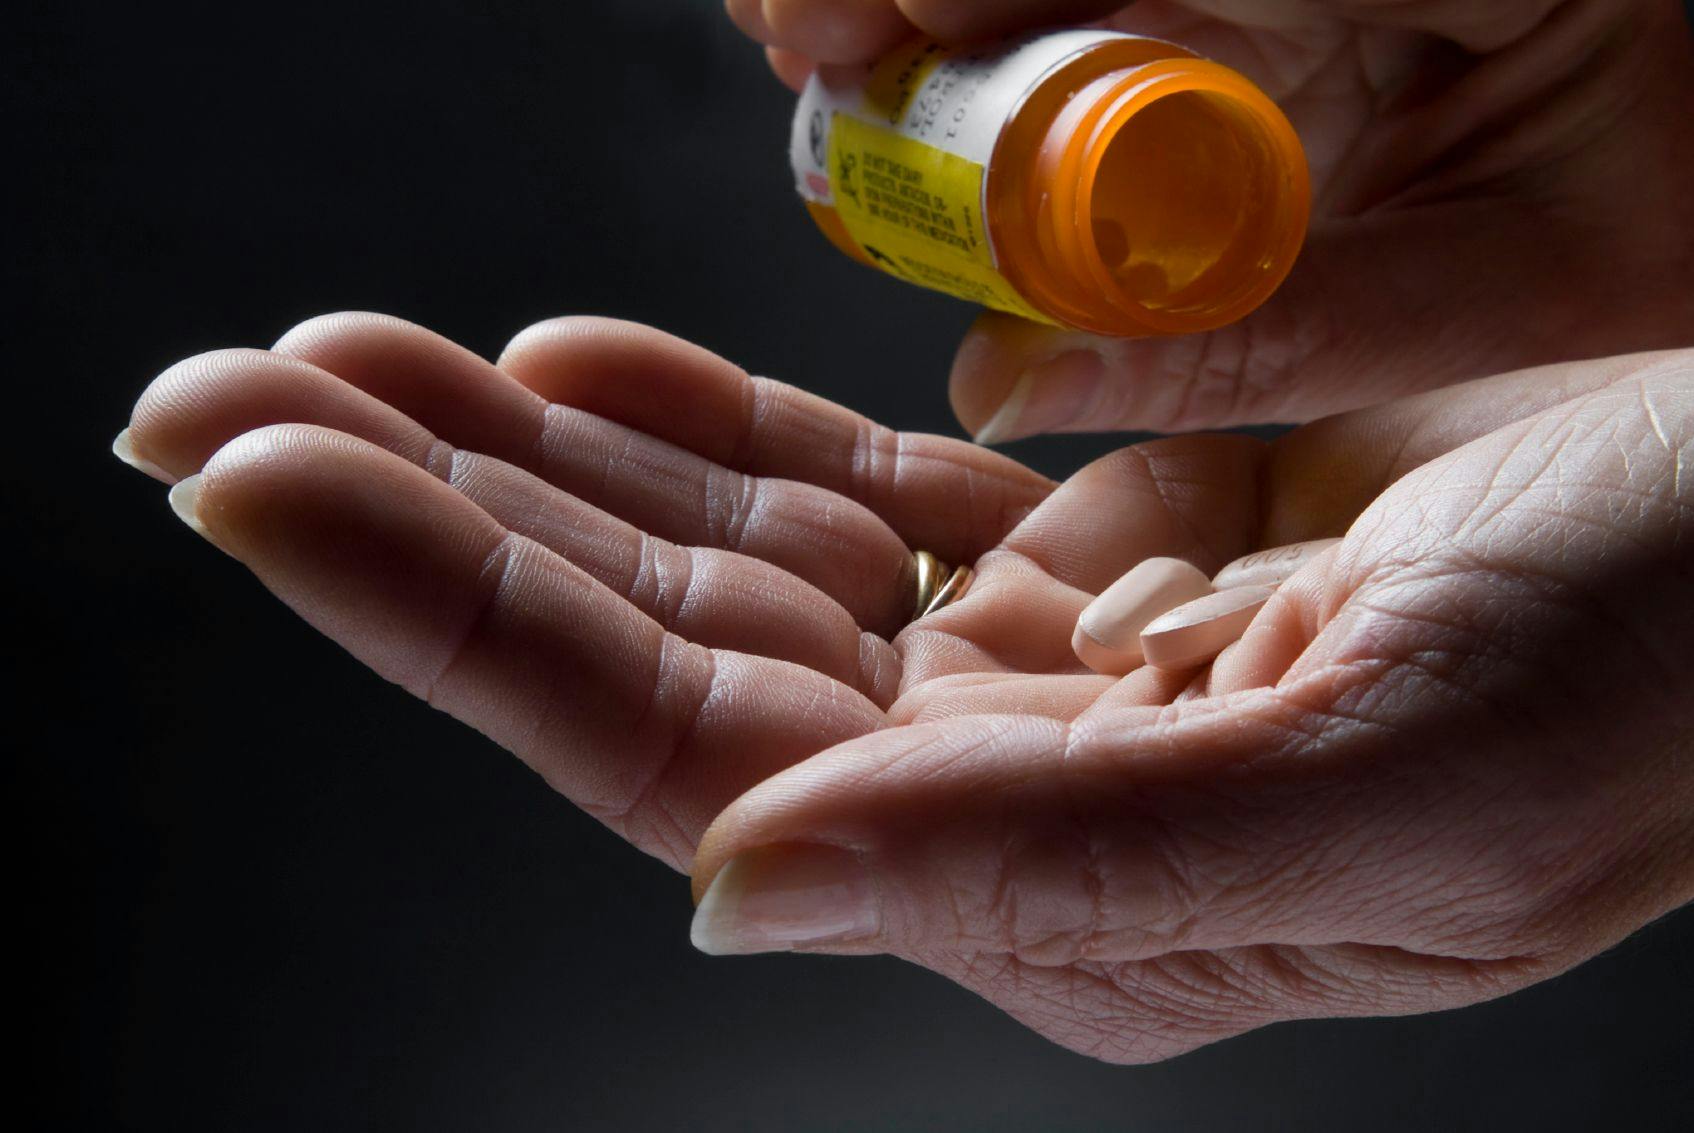 woman pouring pills into hand